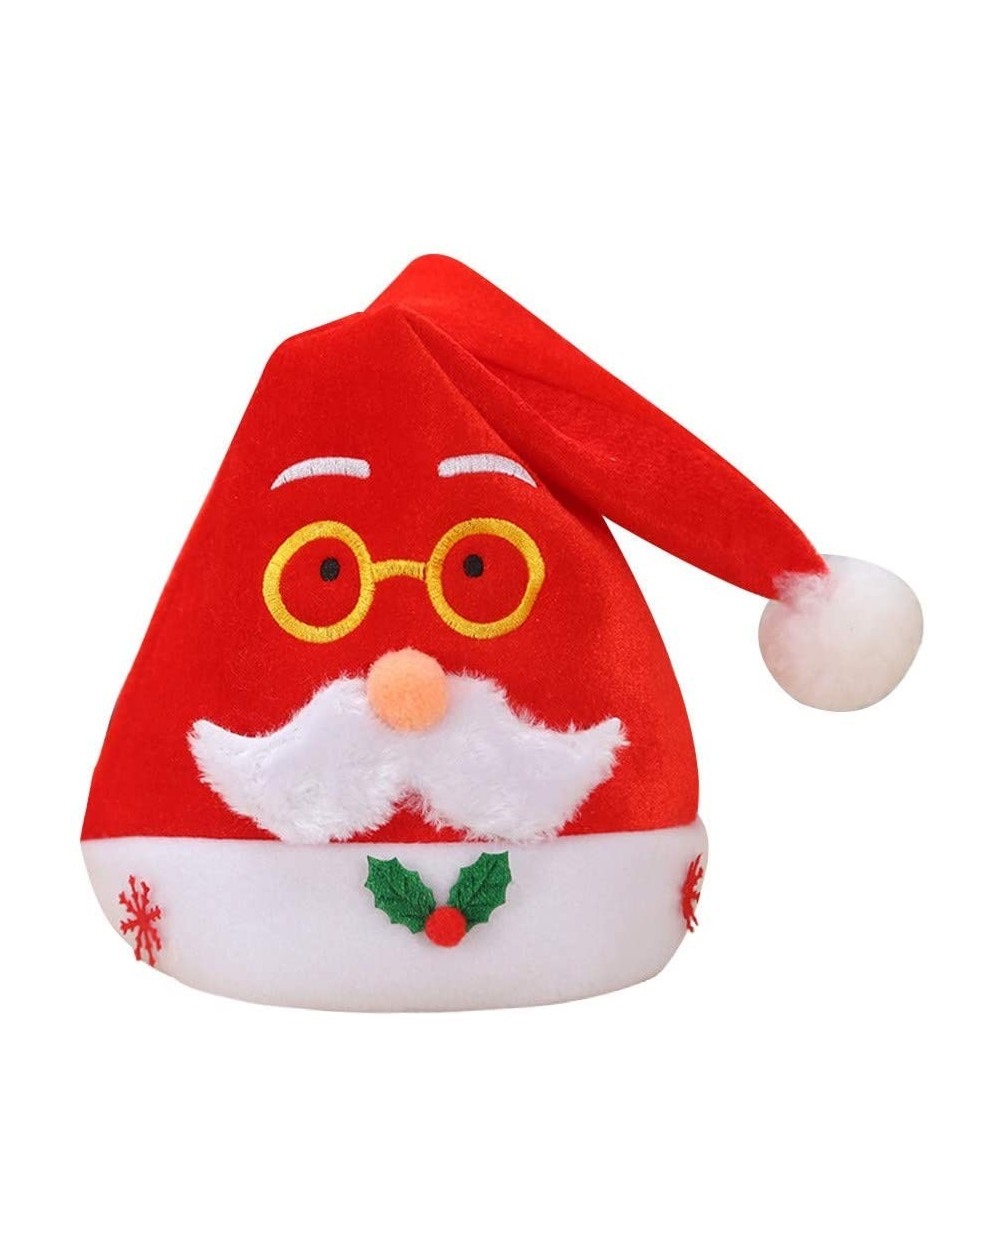 Hats Christmas Hat Adult Child Warm Santa Cap Ornaments Christmas Role Playing Holiday Xmas Party - Multicolor B - CL19I9HLAT...